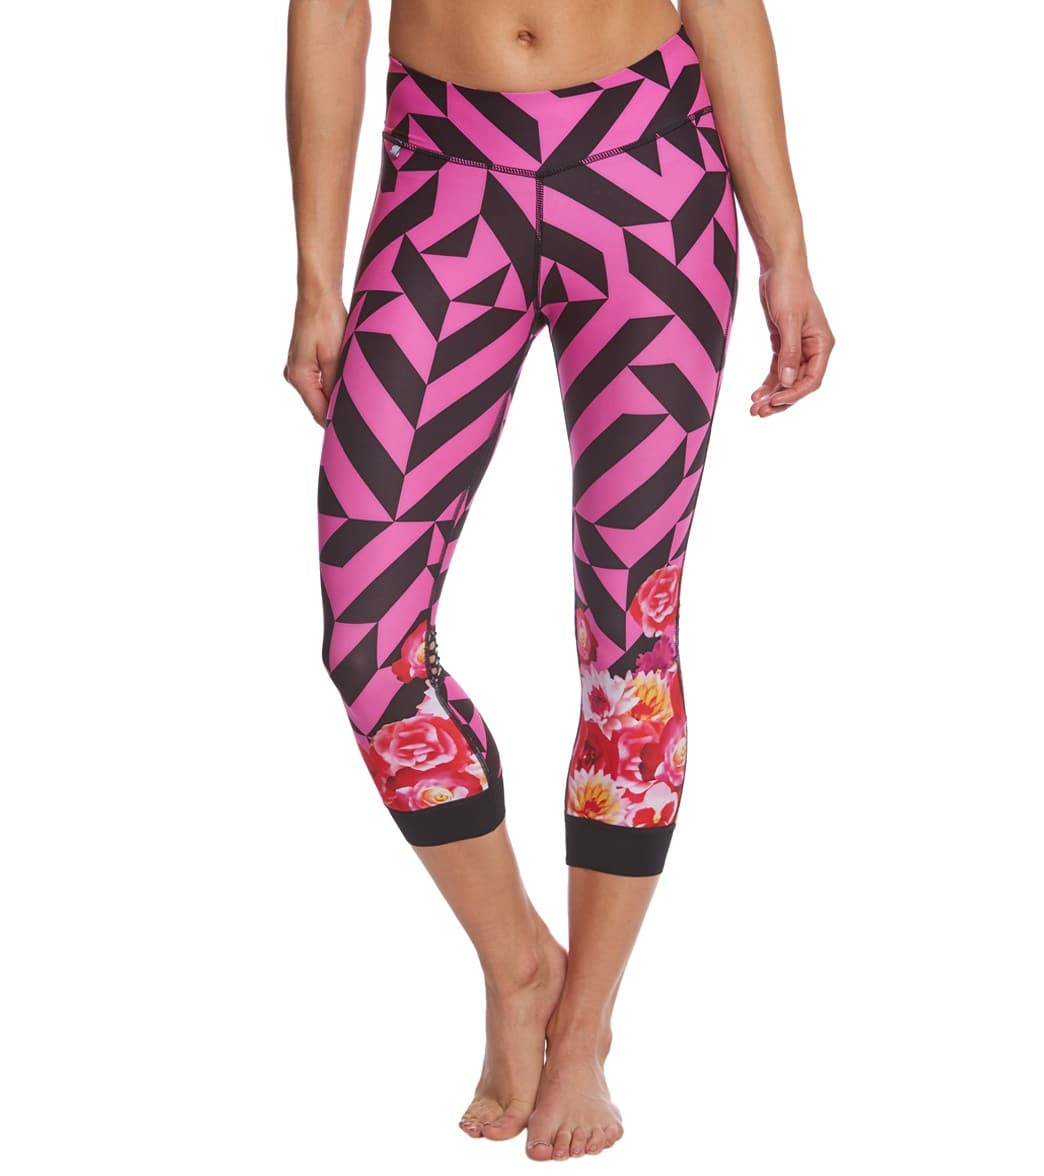 Shebeest Women's Indie Capri - Kleo Bloom X-Small Polyester/Spandex - Swimoutlet.com